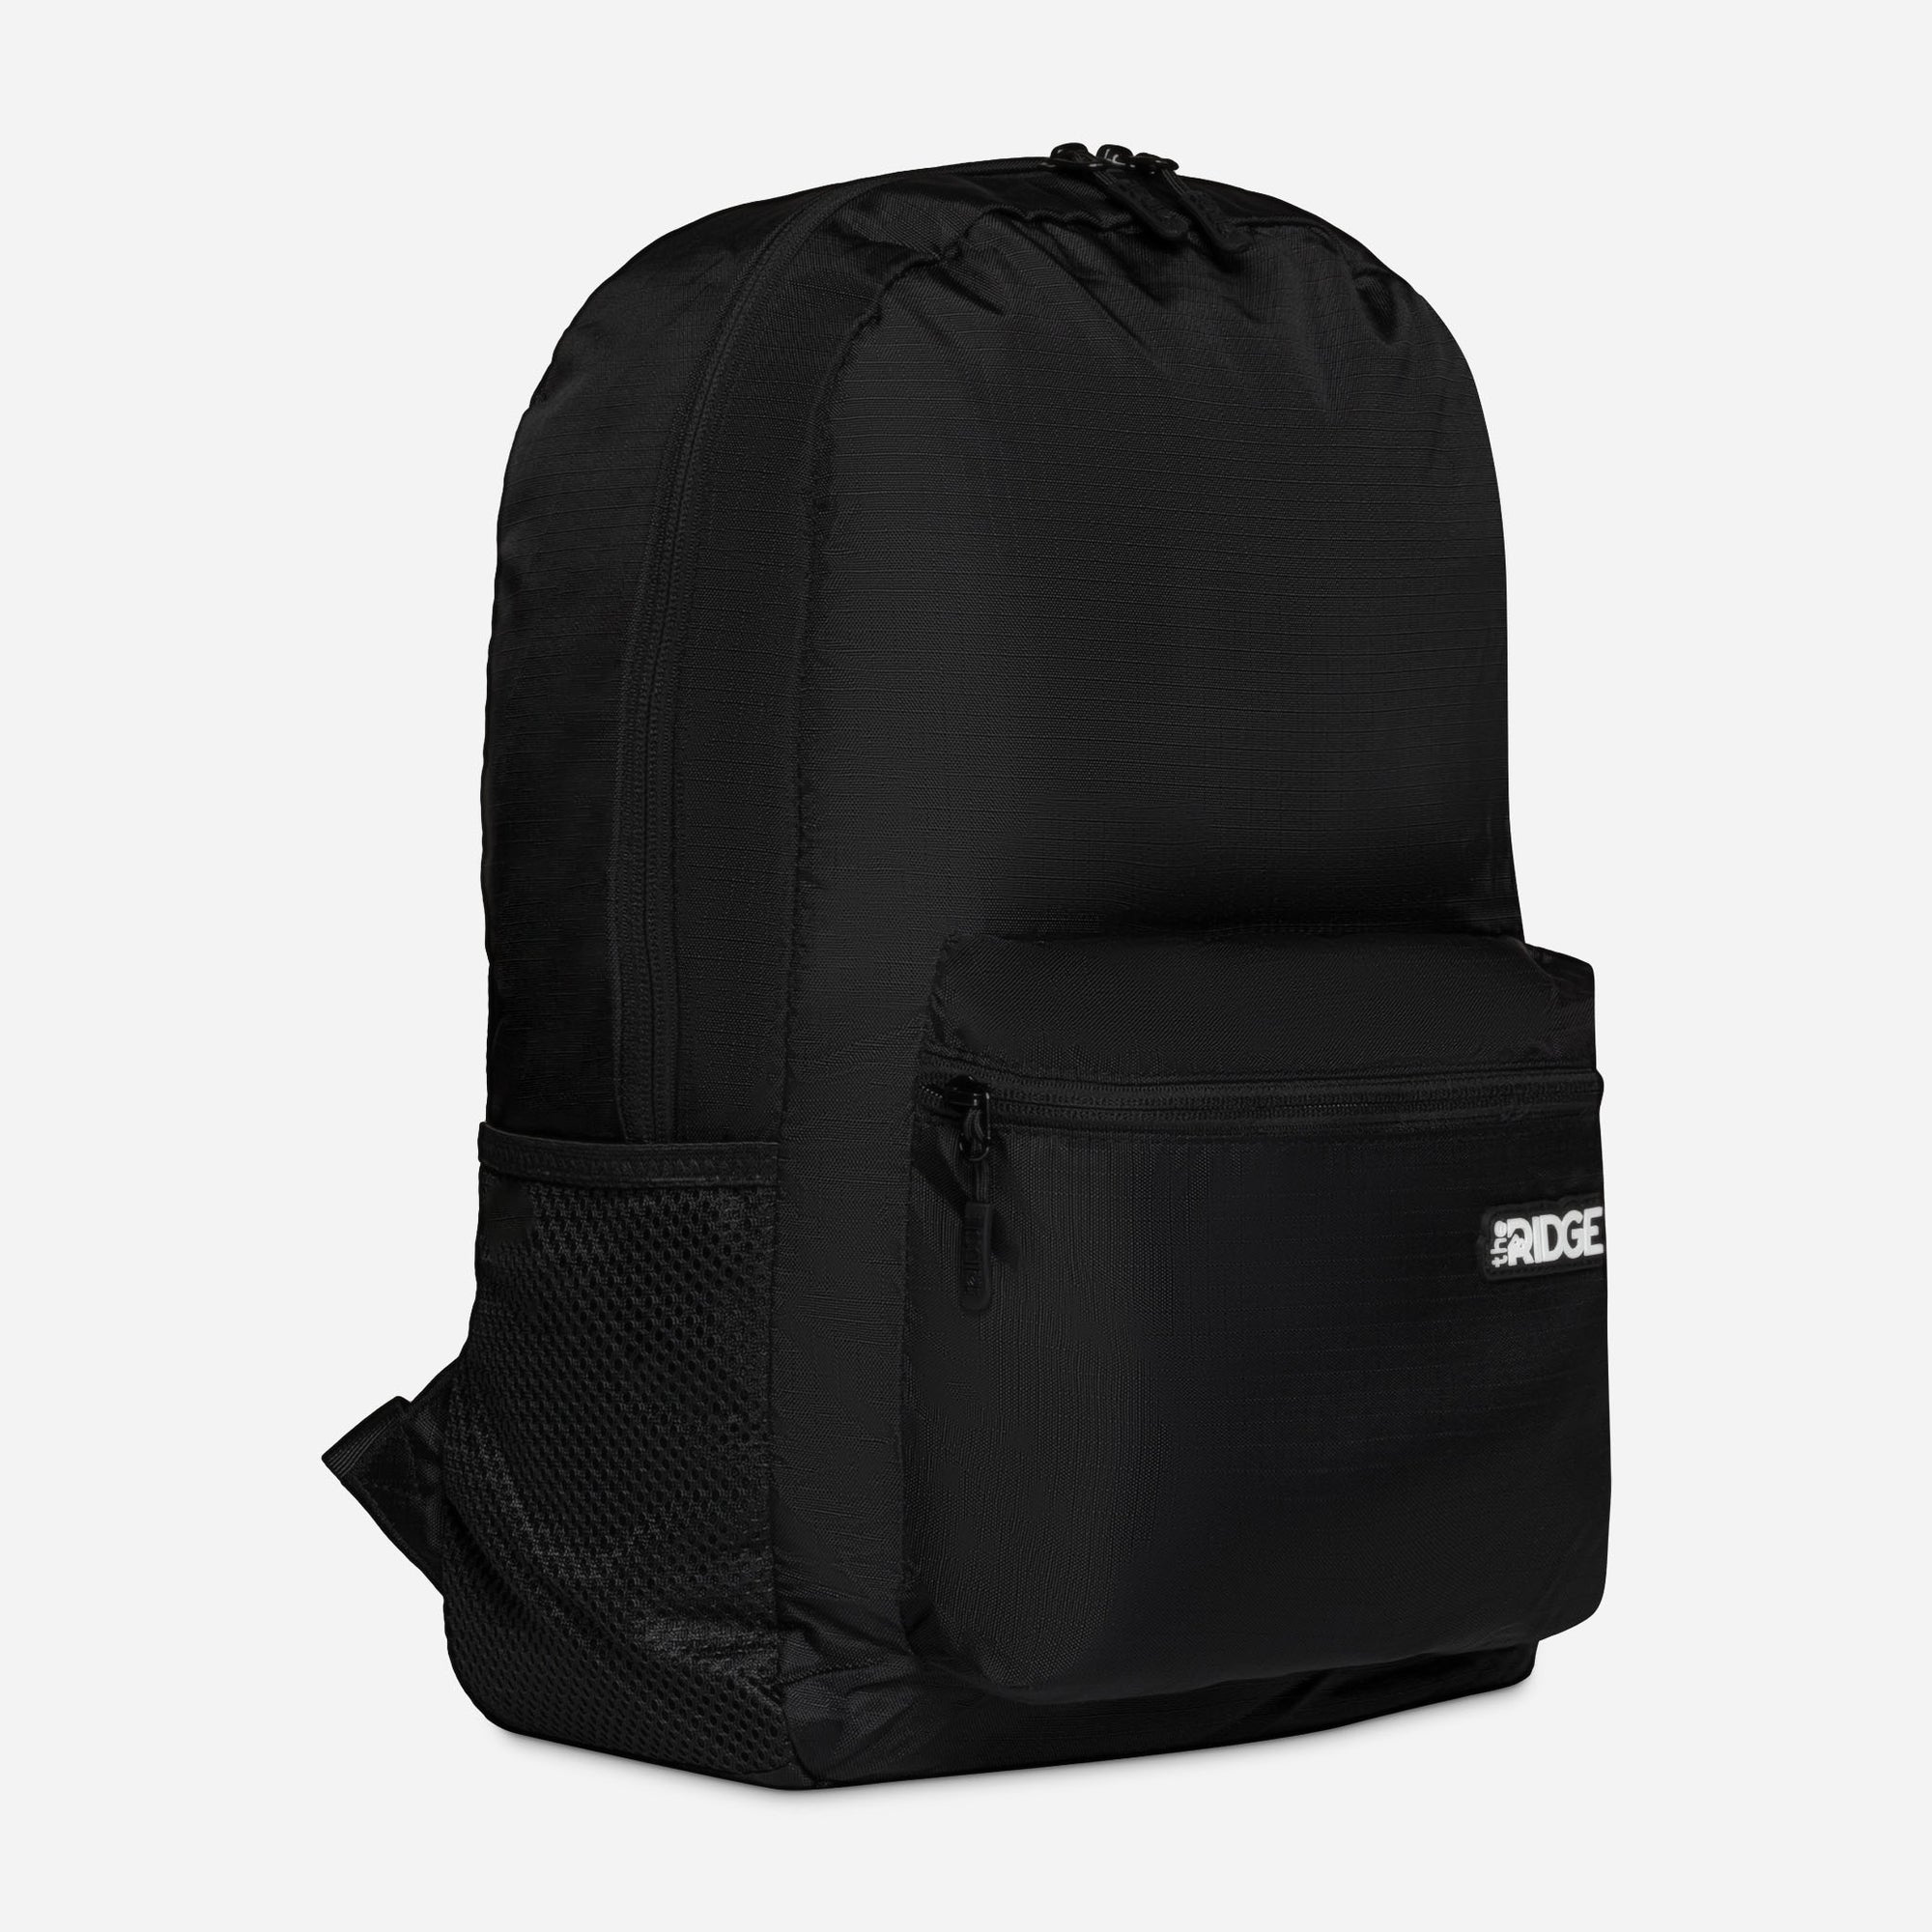 Portable & Packable Backpack